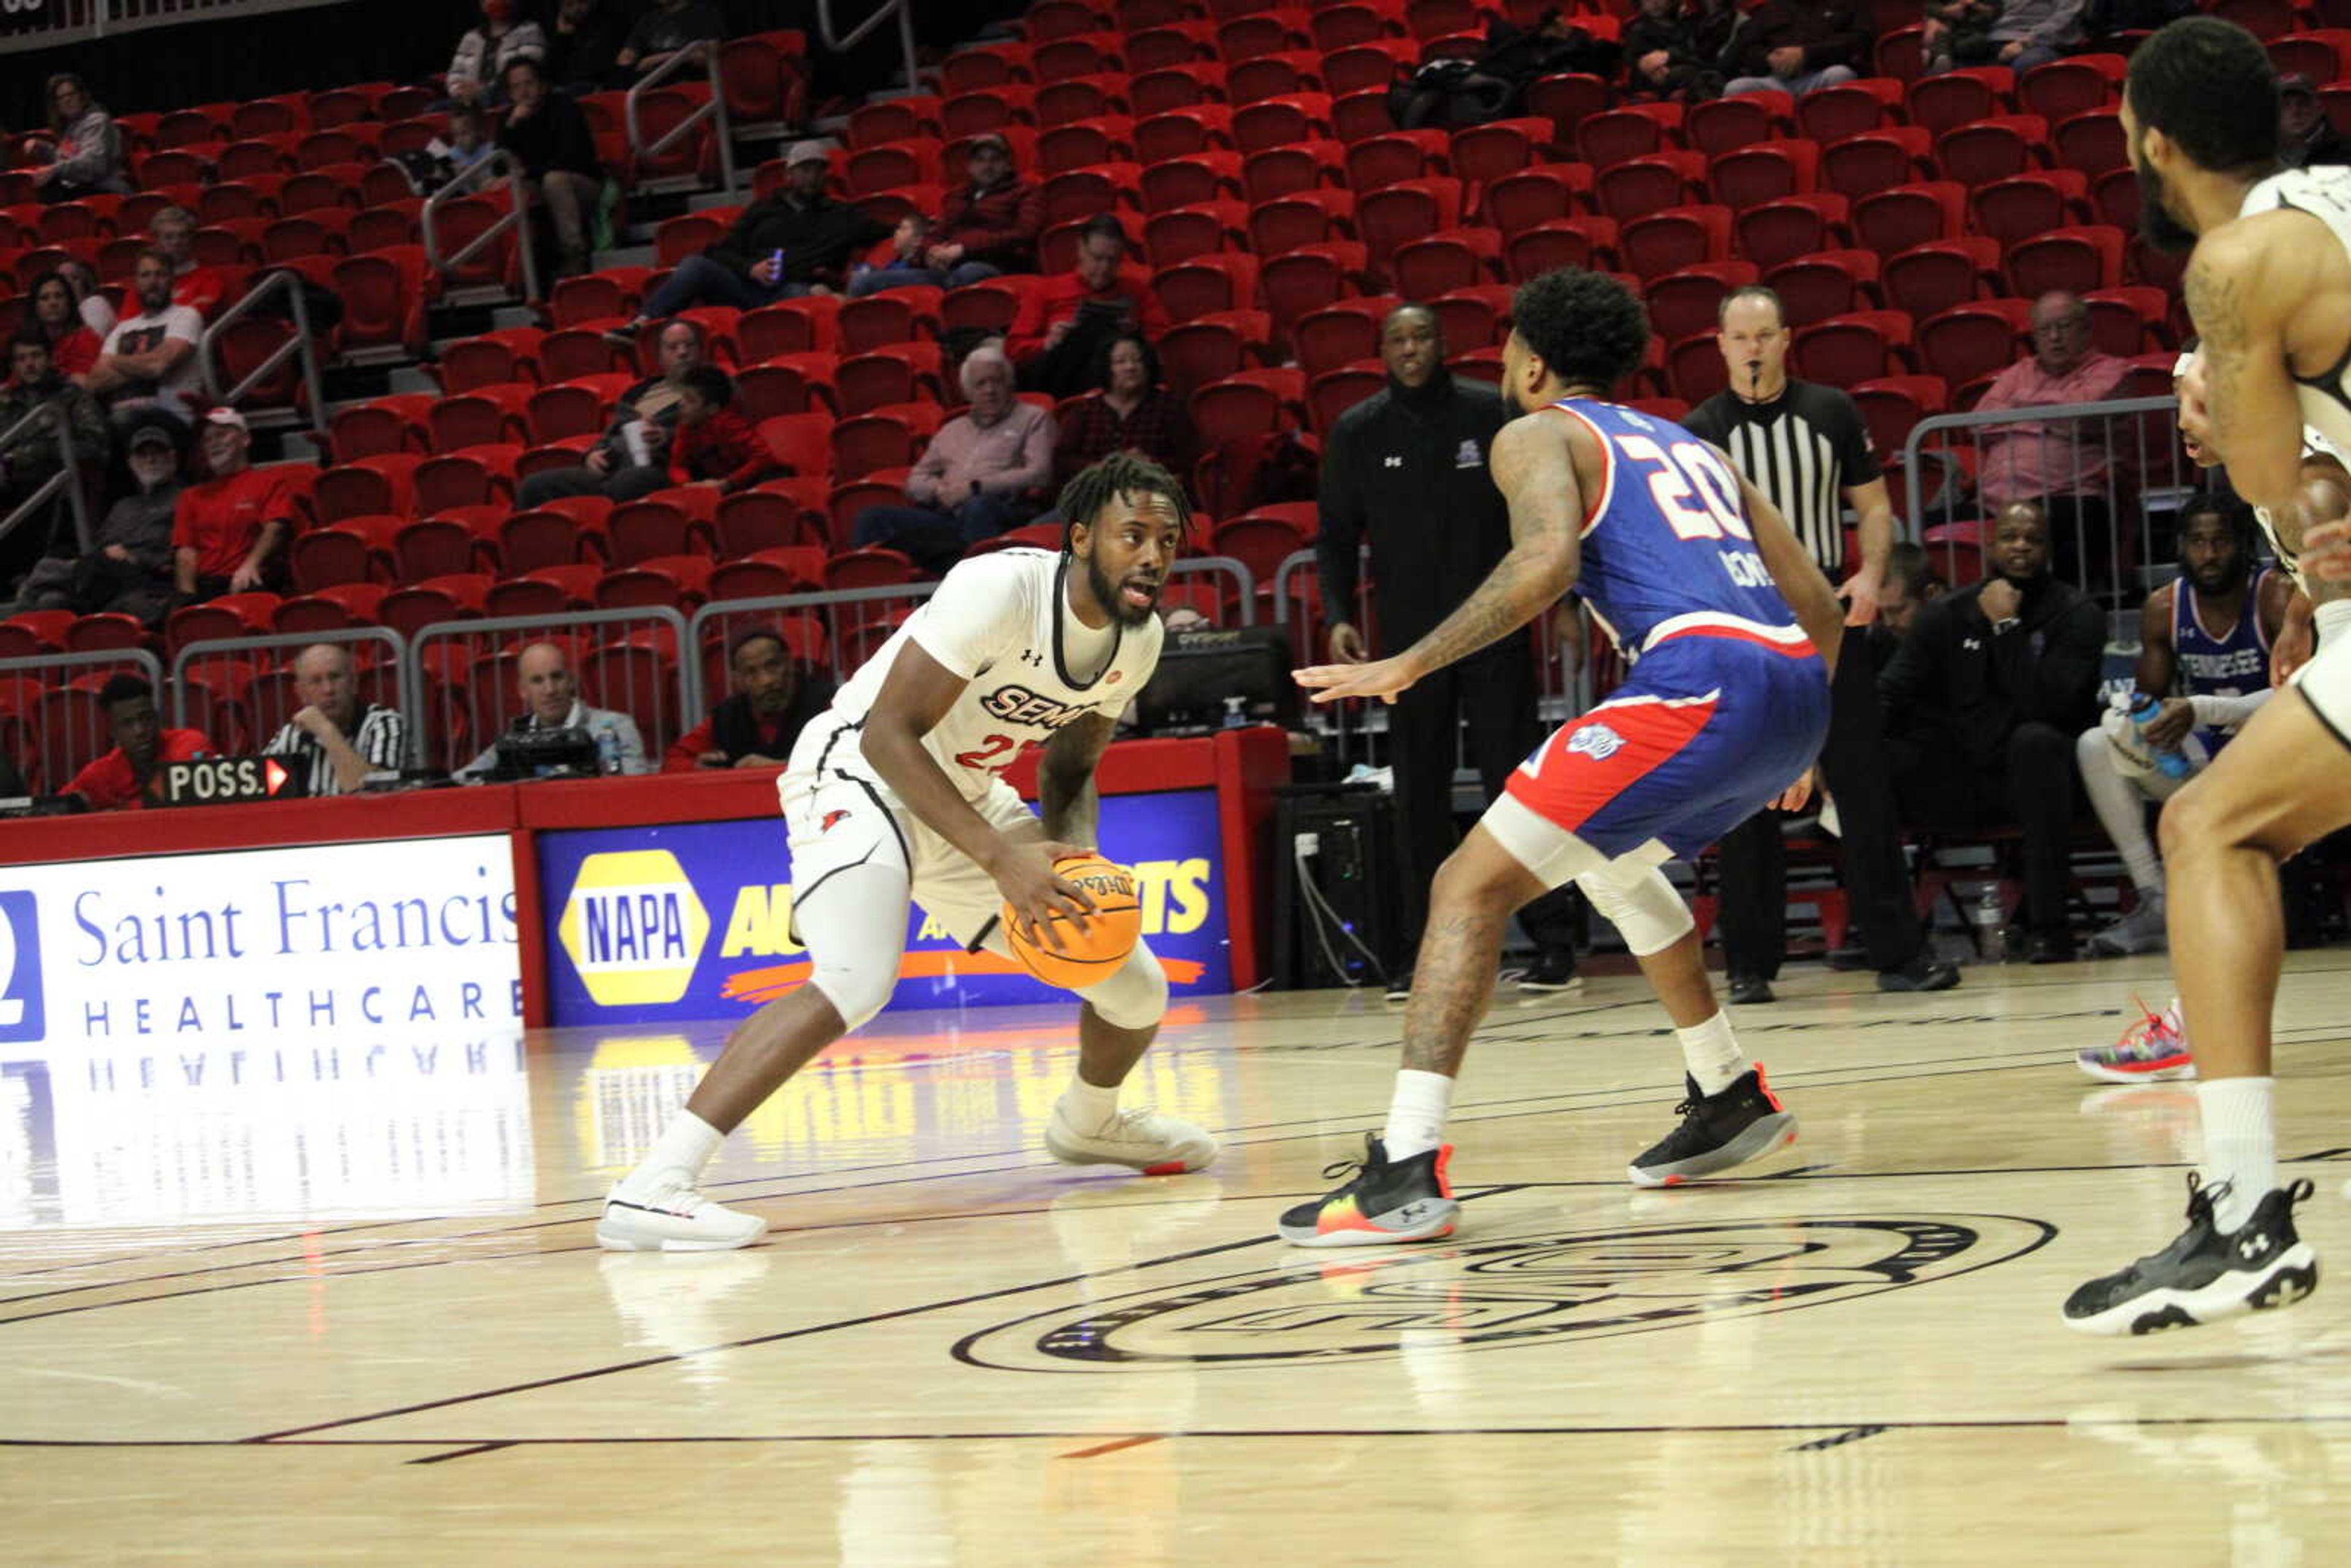 Redshirt junior guard Nana Akenten drives the lane during Southeast's 85-63 win over Tennessee State at the Show Me Center in Cape Girardeau.